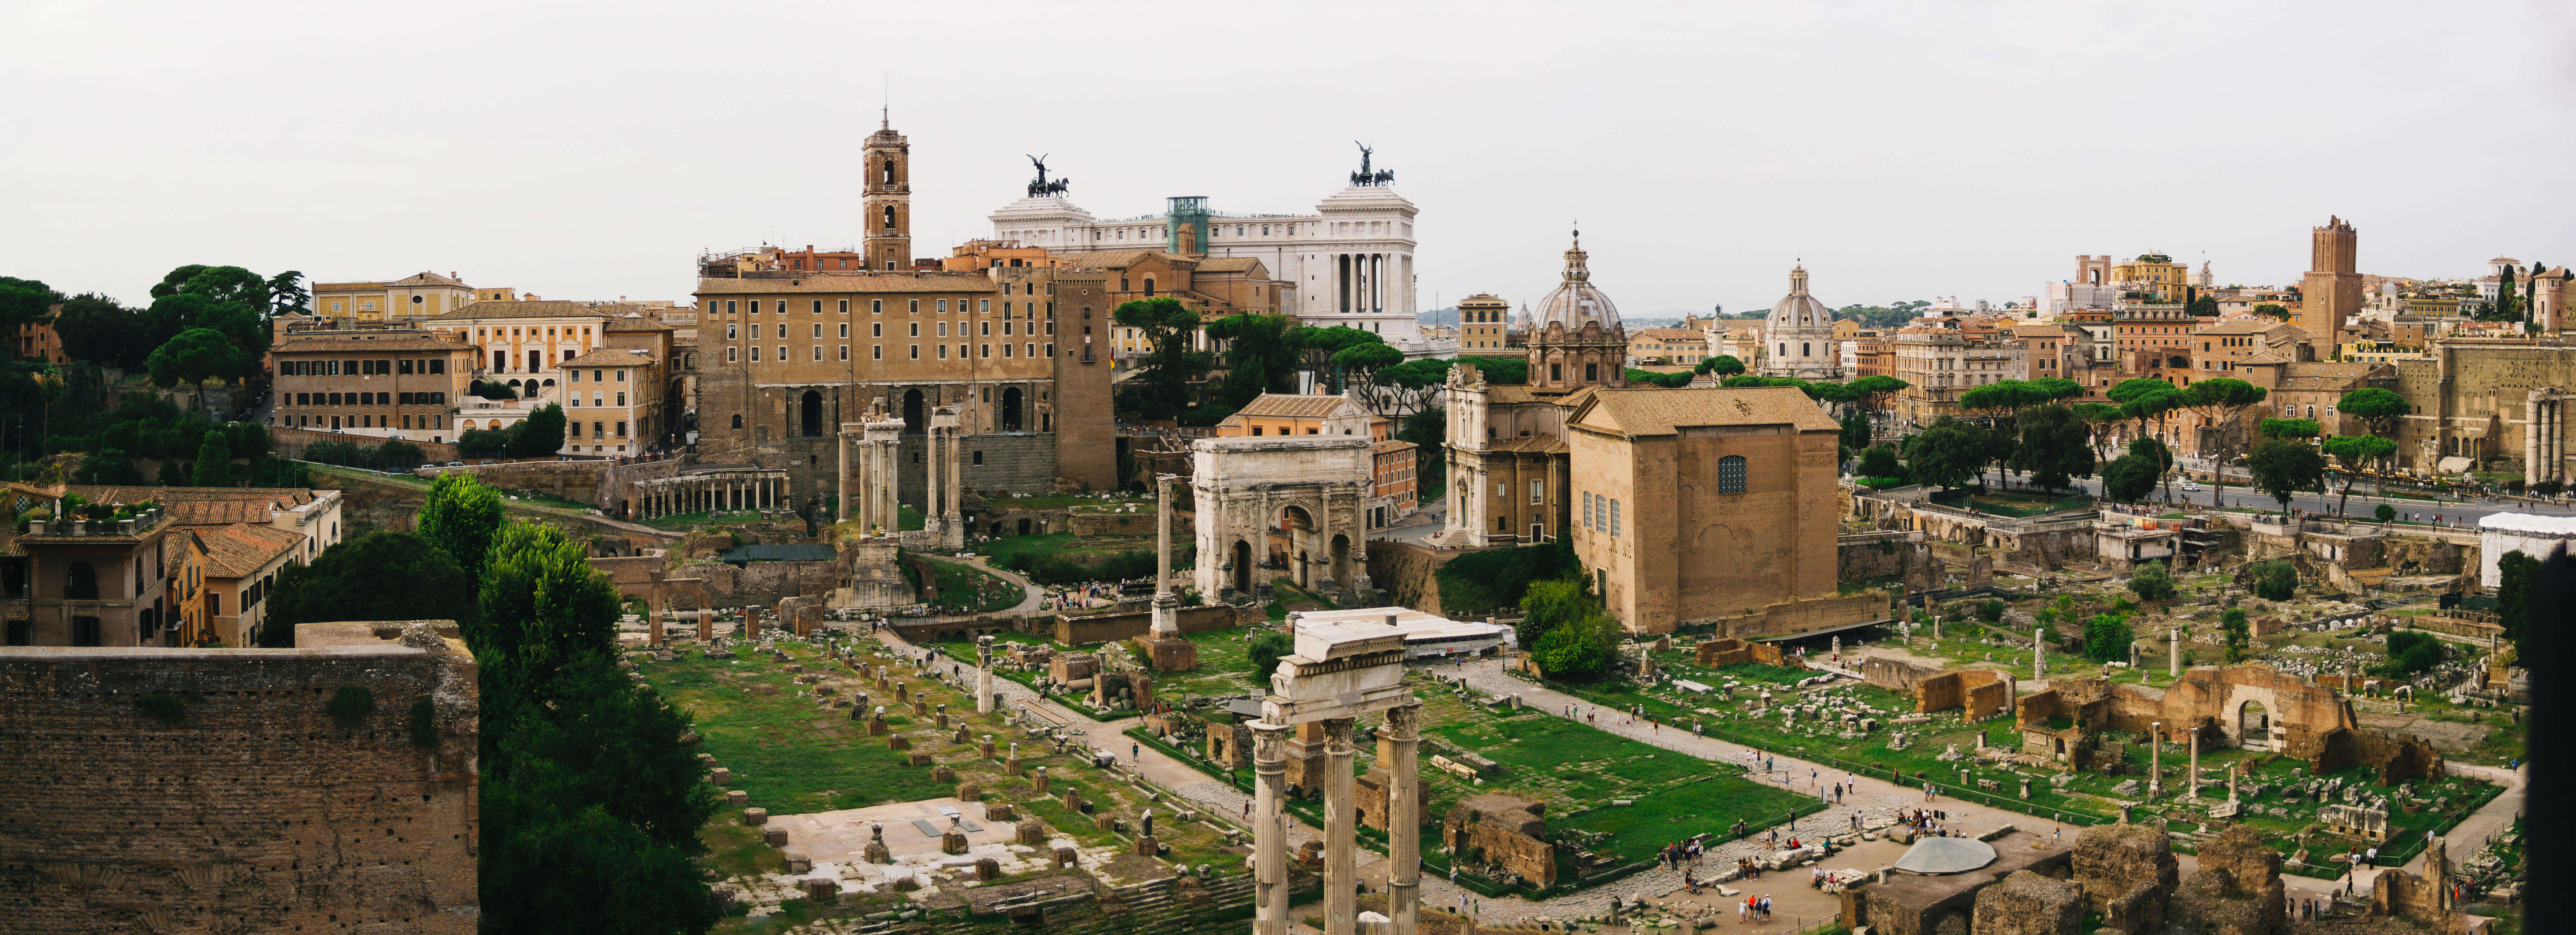 A panoramic view of the remains of the Roman Forum. A few columns stand at their original height, but most are stumps. One arch remains standing. In the background is the modern city of Rome and there are domes and spires.